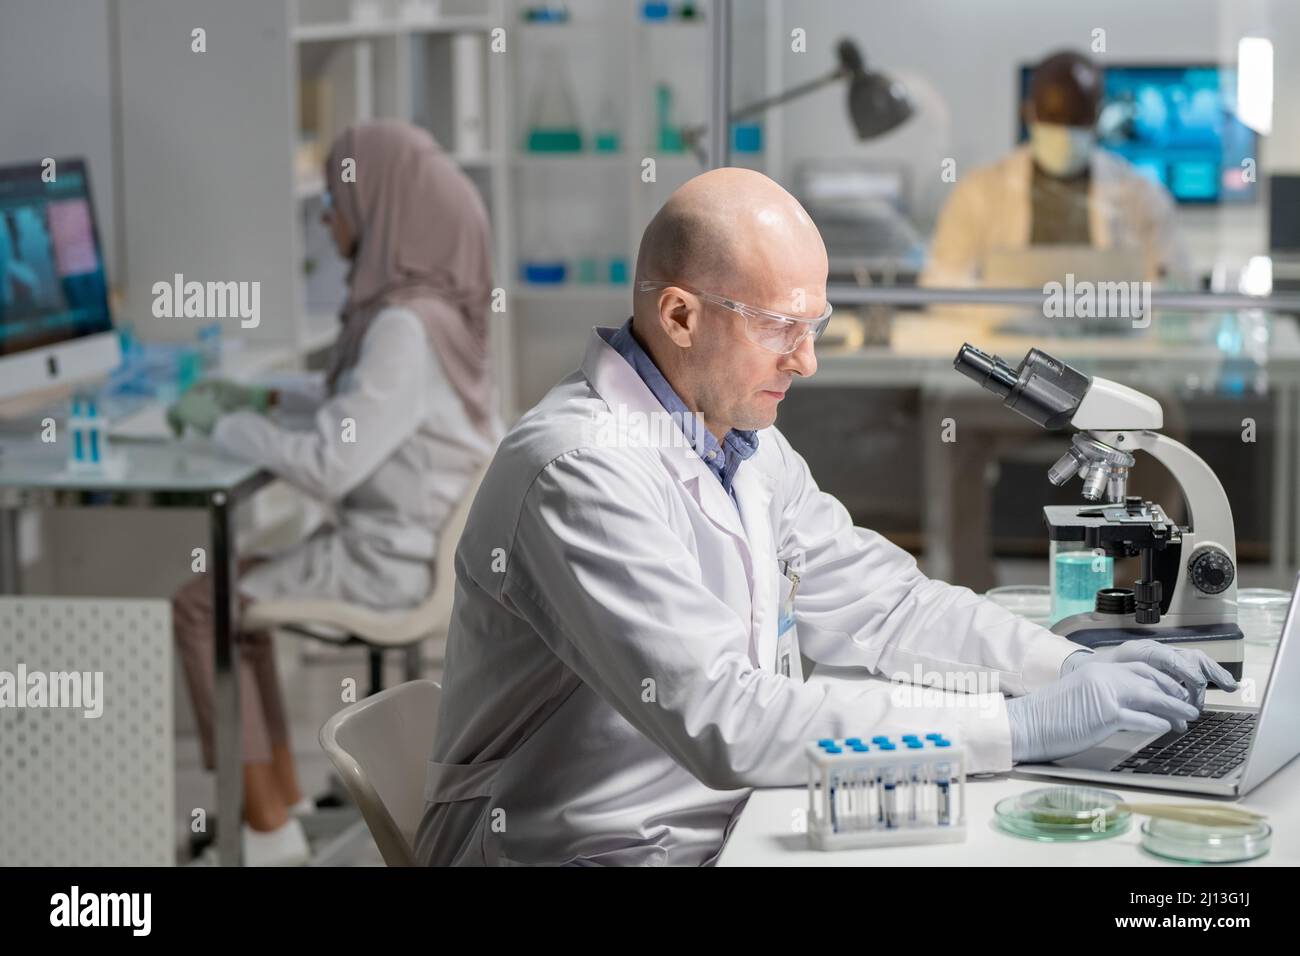 Mature serious male lab worker in gloves, whitecoat and protective eyeglasses searching for scientific information in the net Stock Photo